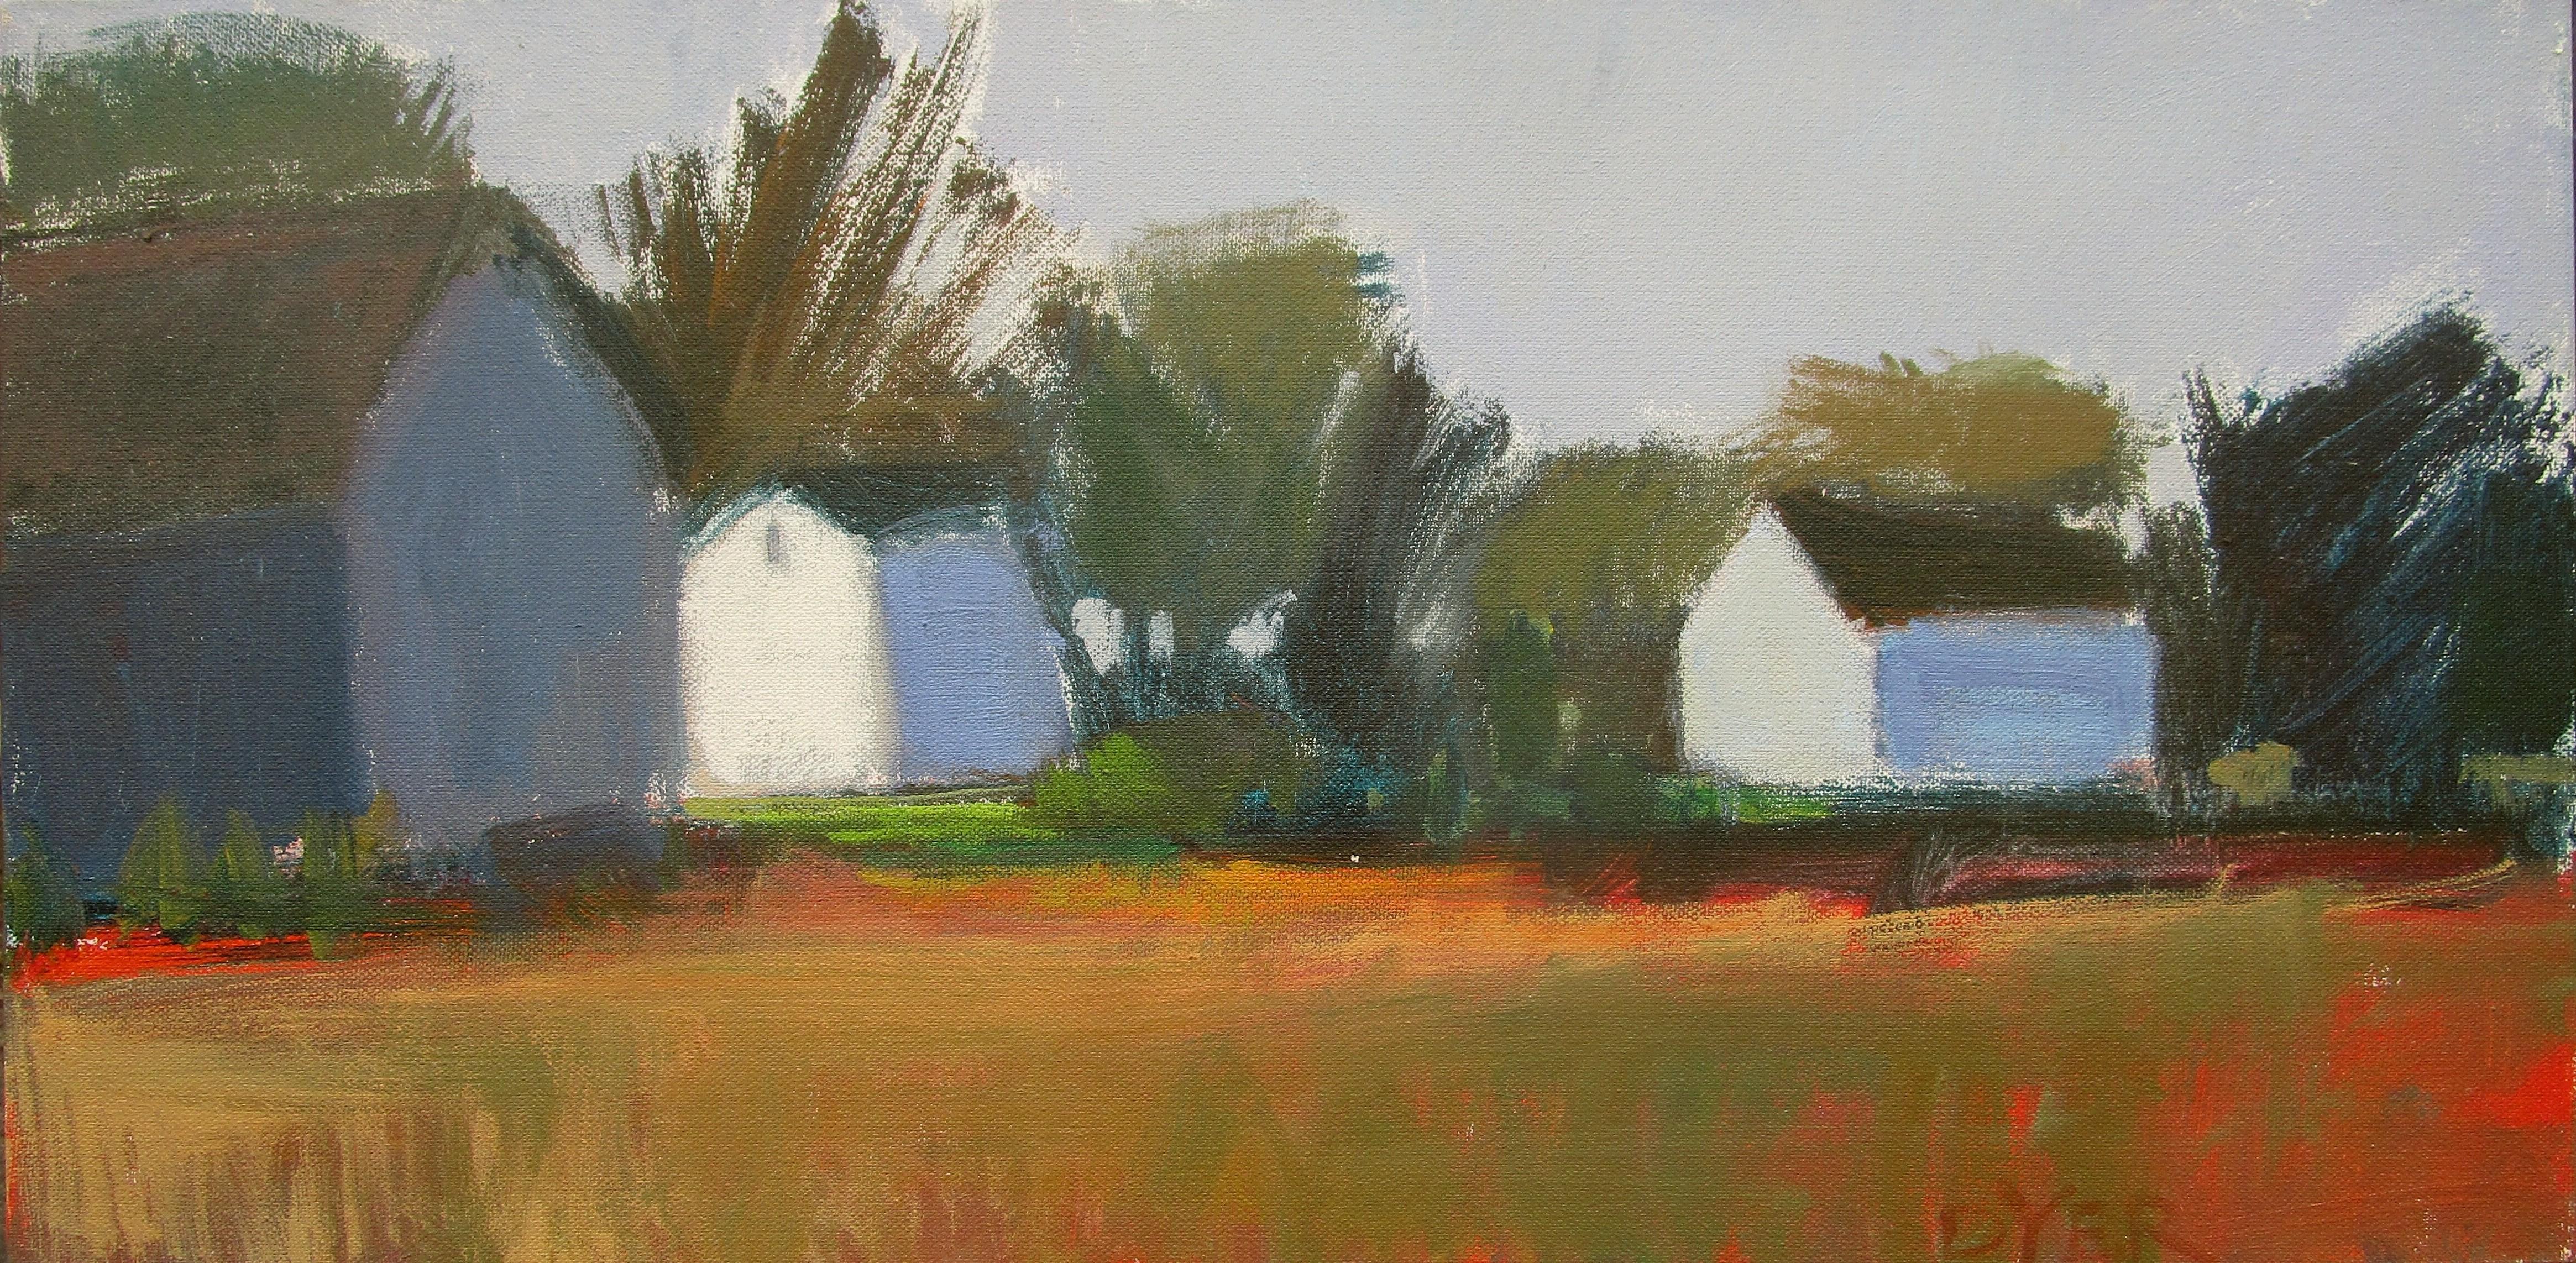 Janet Dyer Landscape Painting - Farm in Afternoon Light, Original Painting